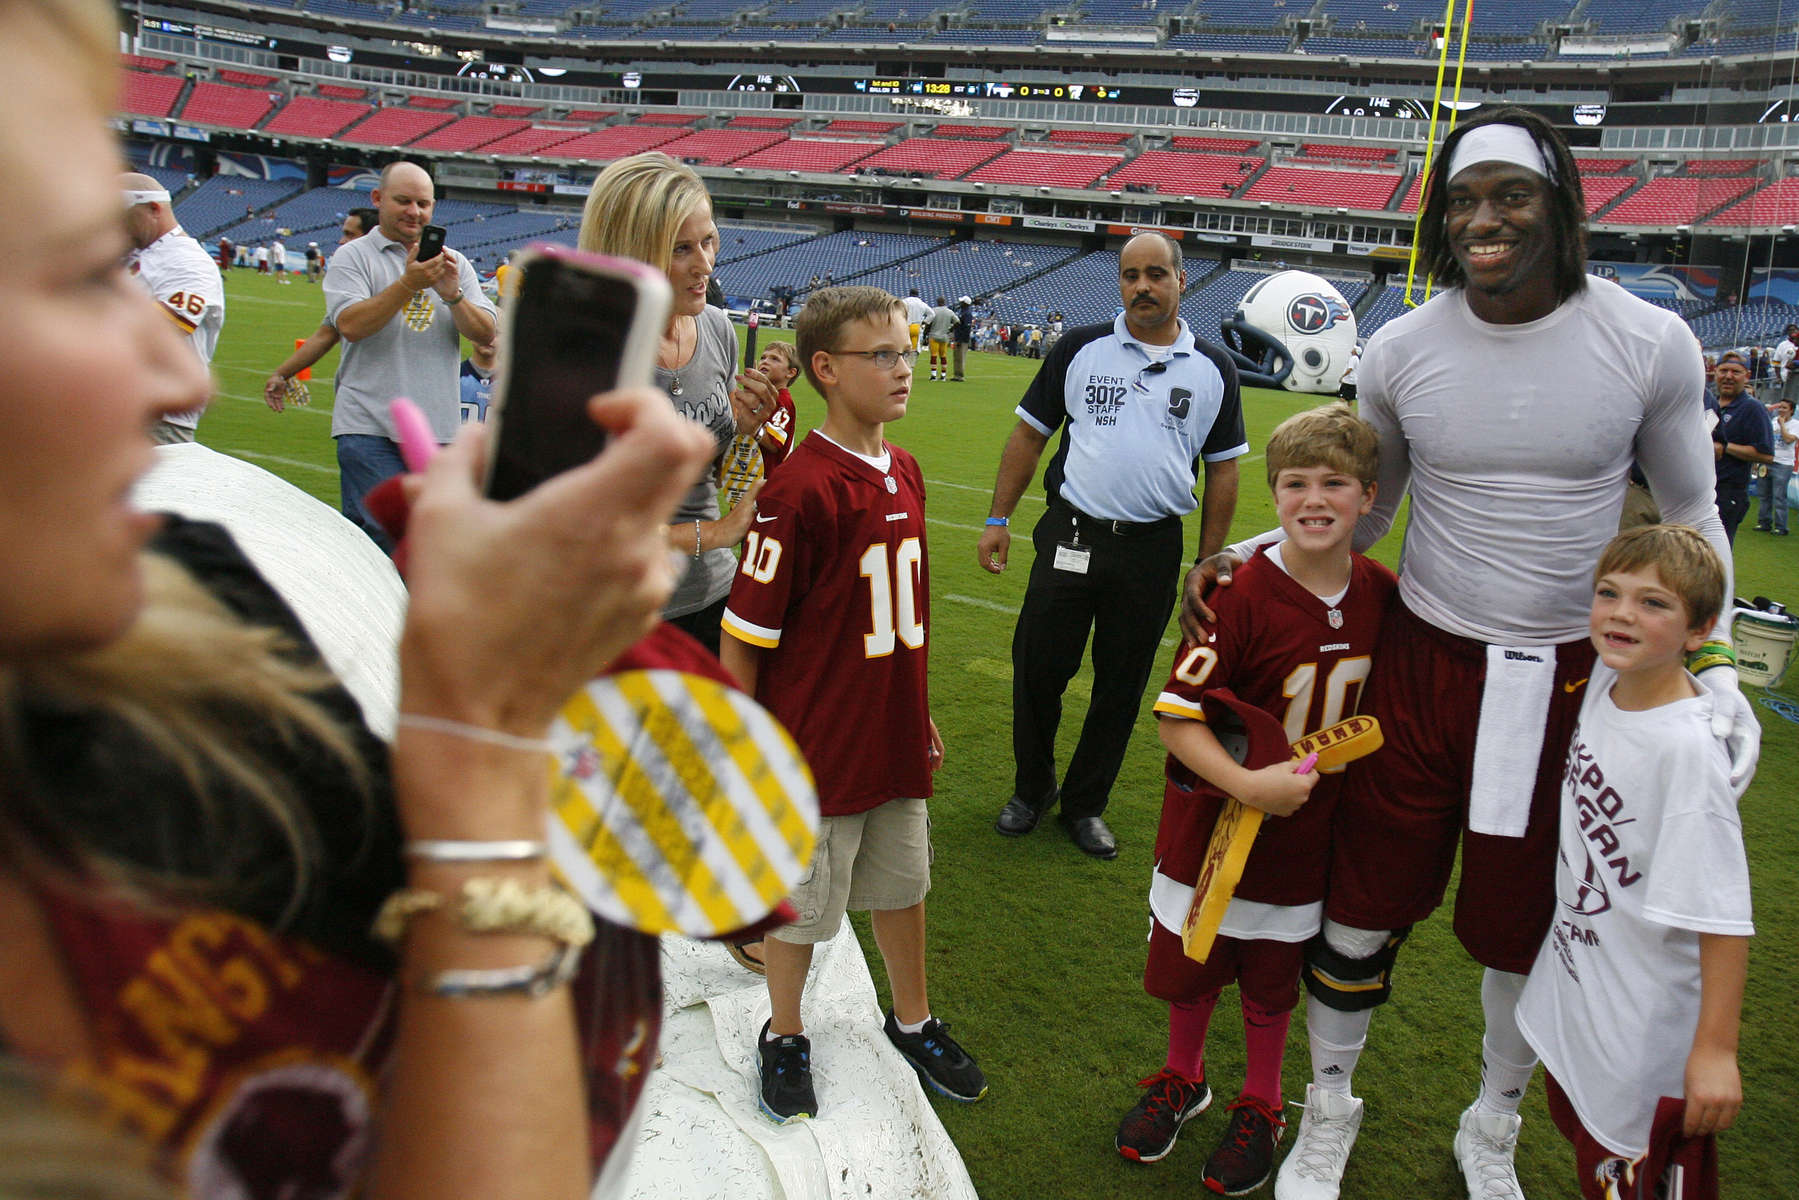 Washington Redskins quarterback Robert Griffin III poses for photos with fans before a preseason NFL football game against the Tennessee Titans on Aug. 8, 2013, in Nashville, Tenn. (AP Photo/ Mark Zaleski)